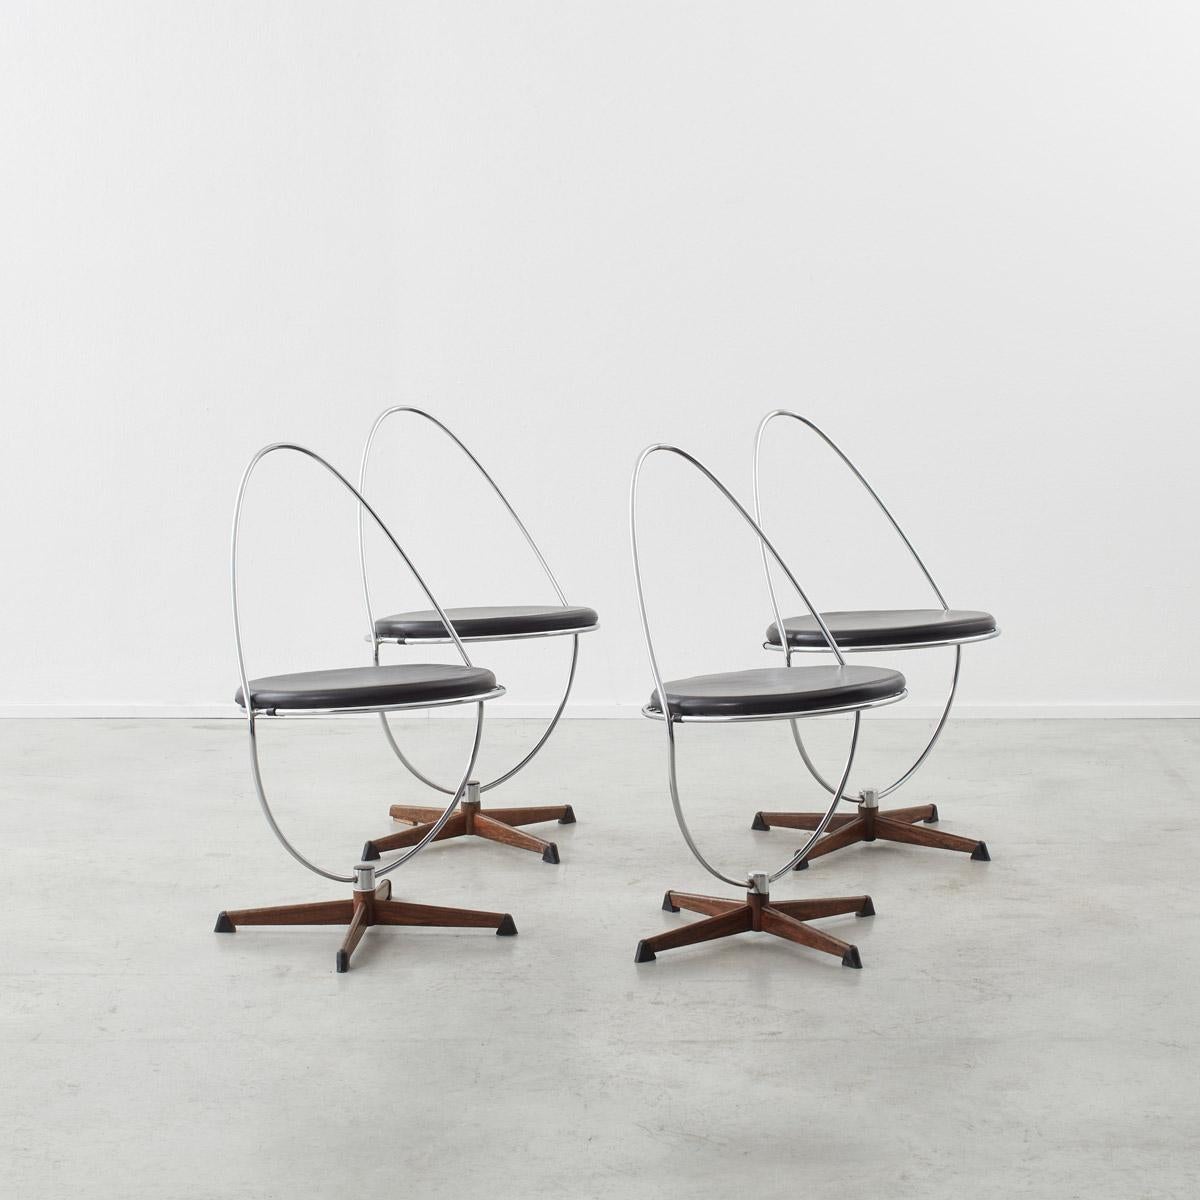 This set of four Arne Dahle`n chairs was manufactured by Dahléns Company in the Swedish town Dalum. His company was solely devoted to the production of chairs often which featured high pointed backs. This set of dining chairs reimagines this